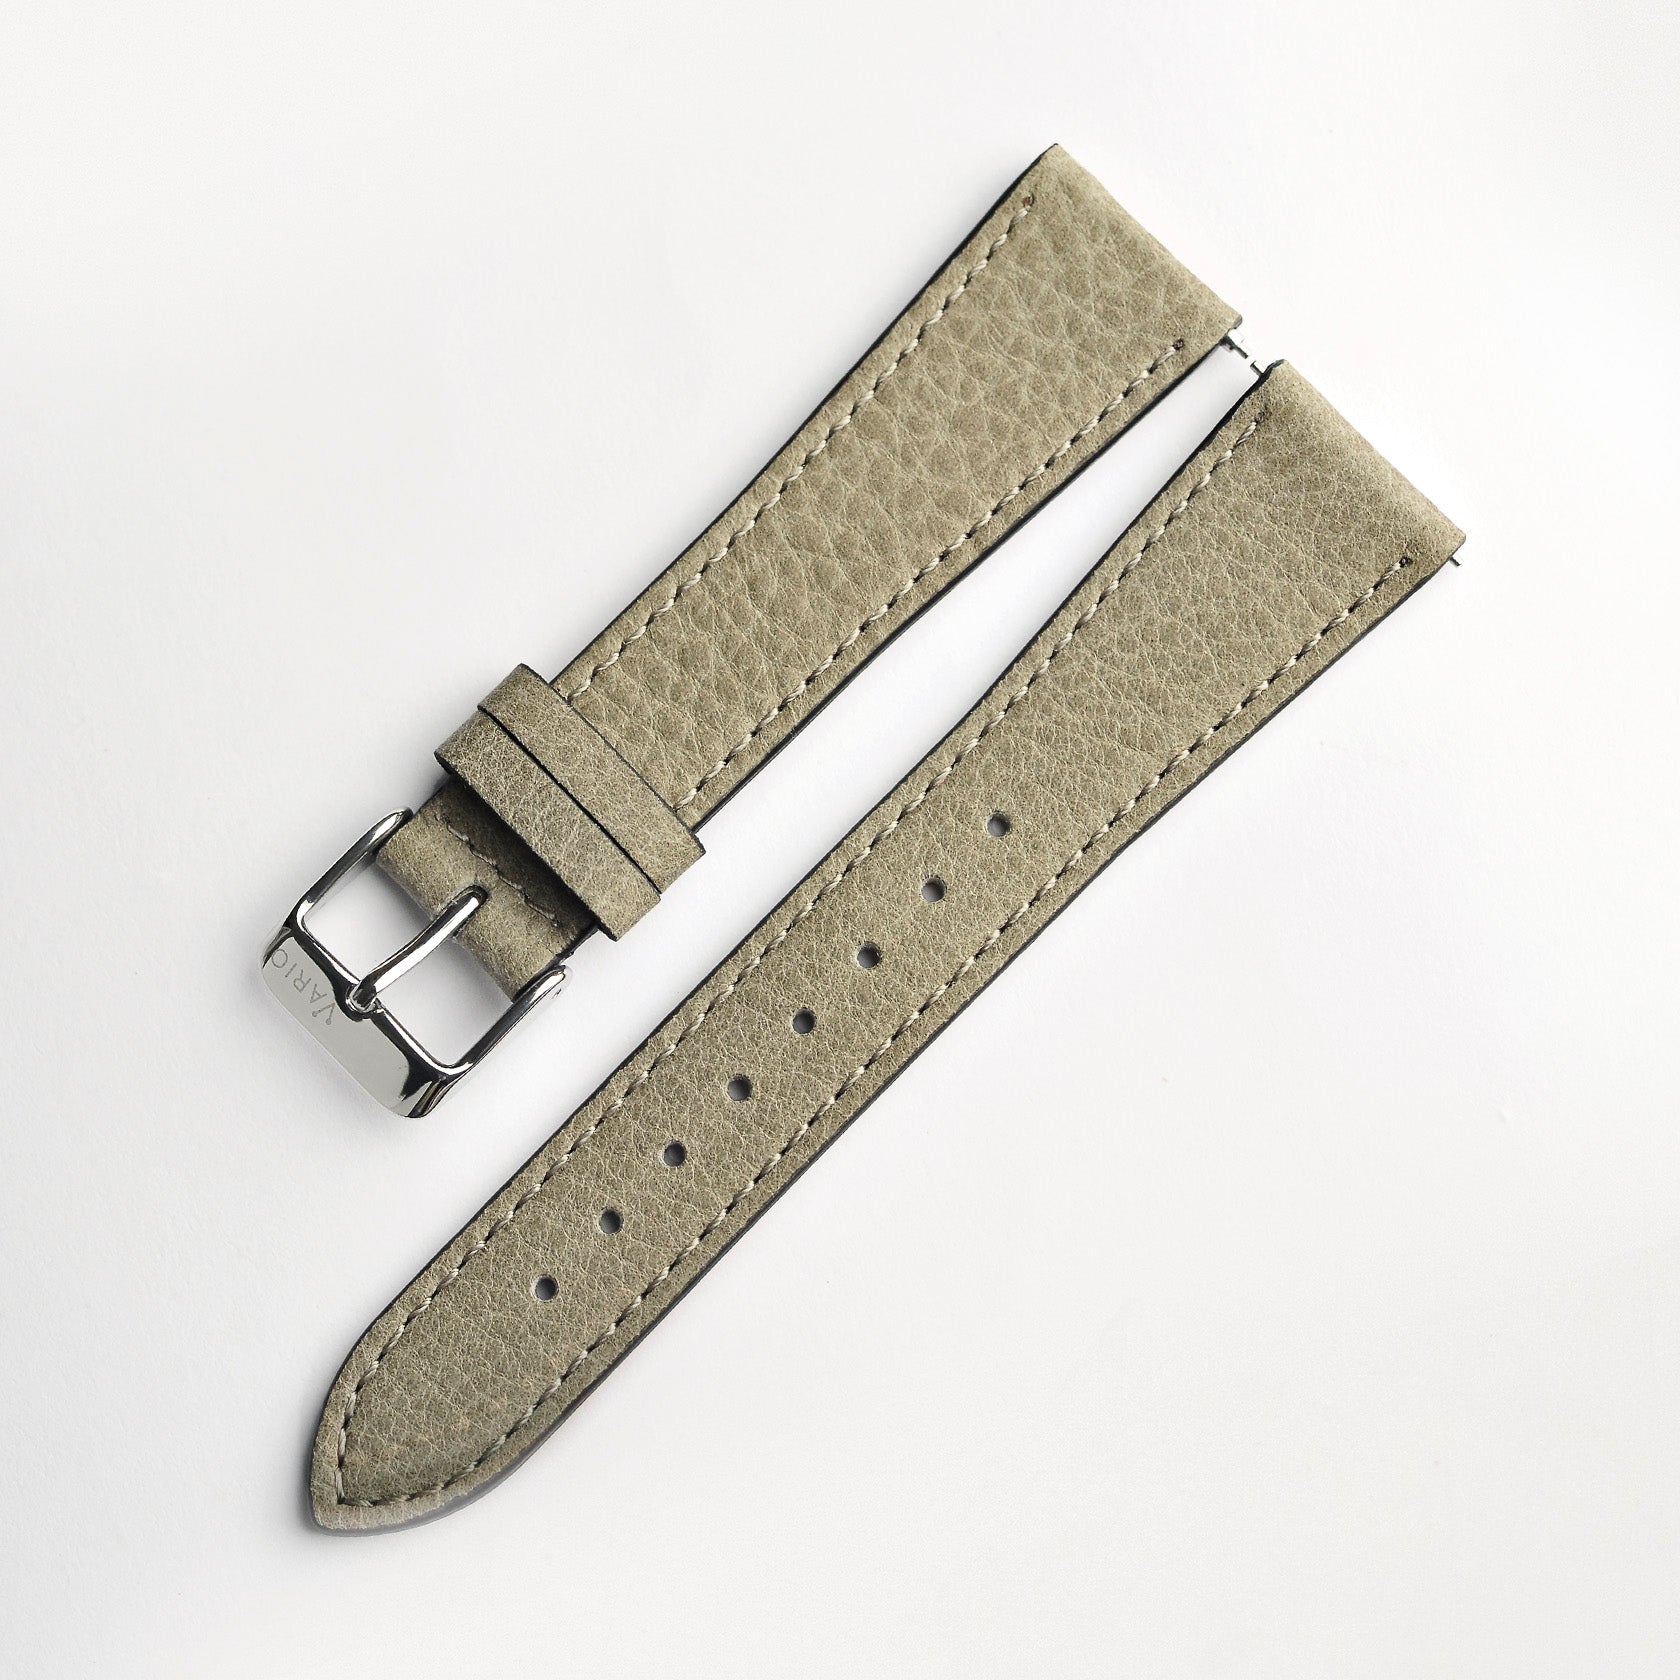 vario natural grain german leather with quick release watch strap